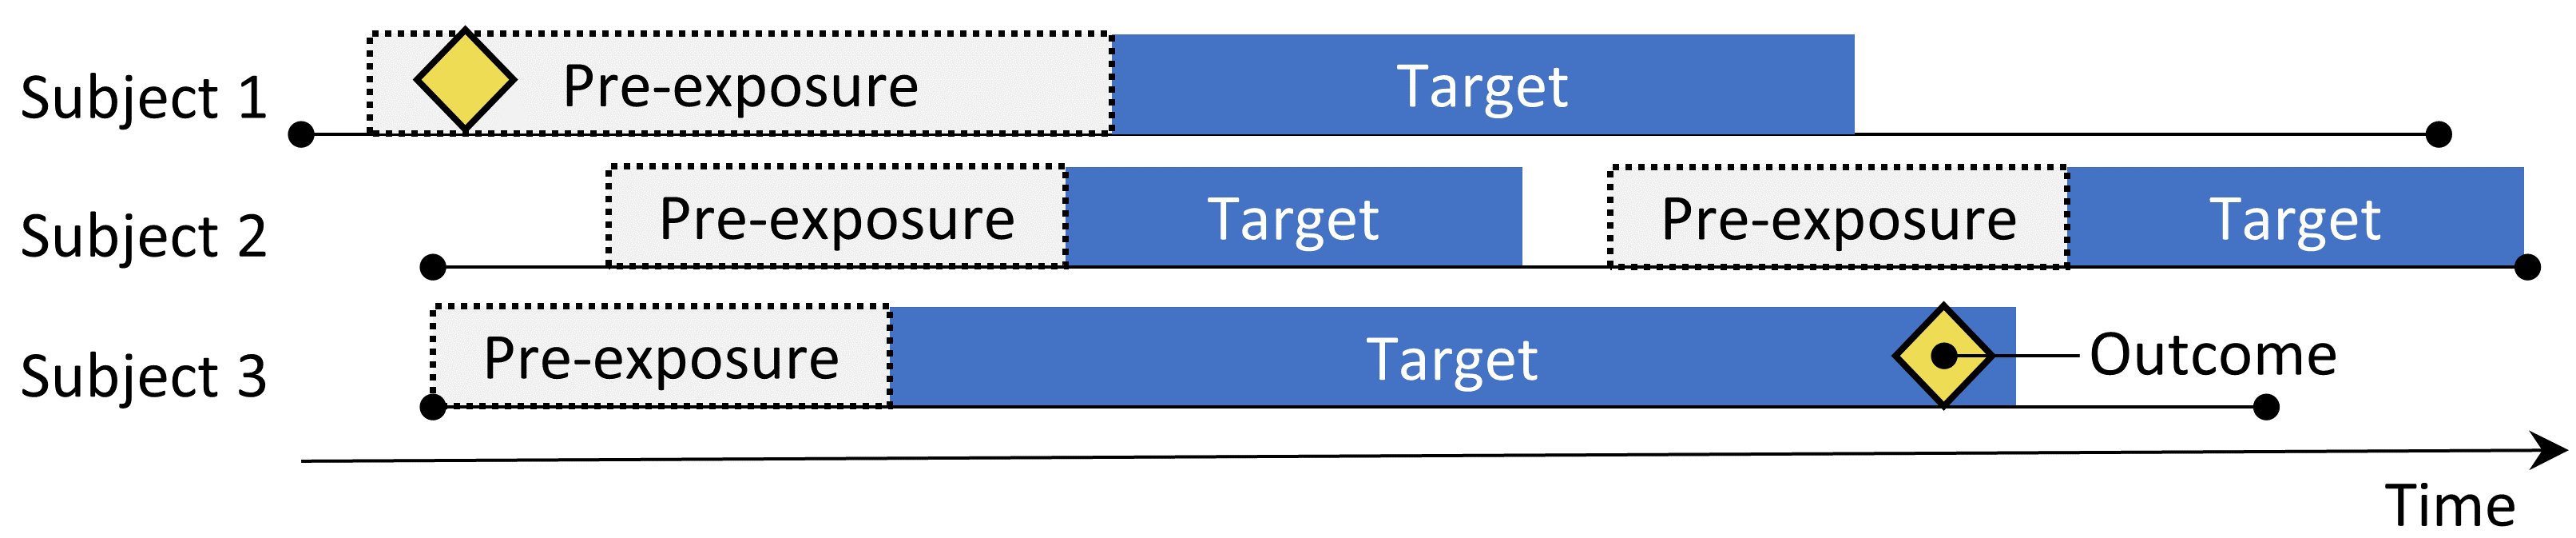 The self-controlled cohort design. The rate of outcomes during exposure to the target is compared to the rate of outcomes in the time pre-exposure.